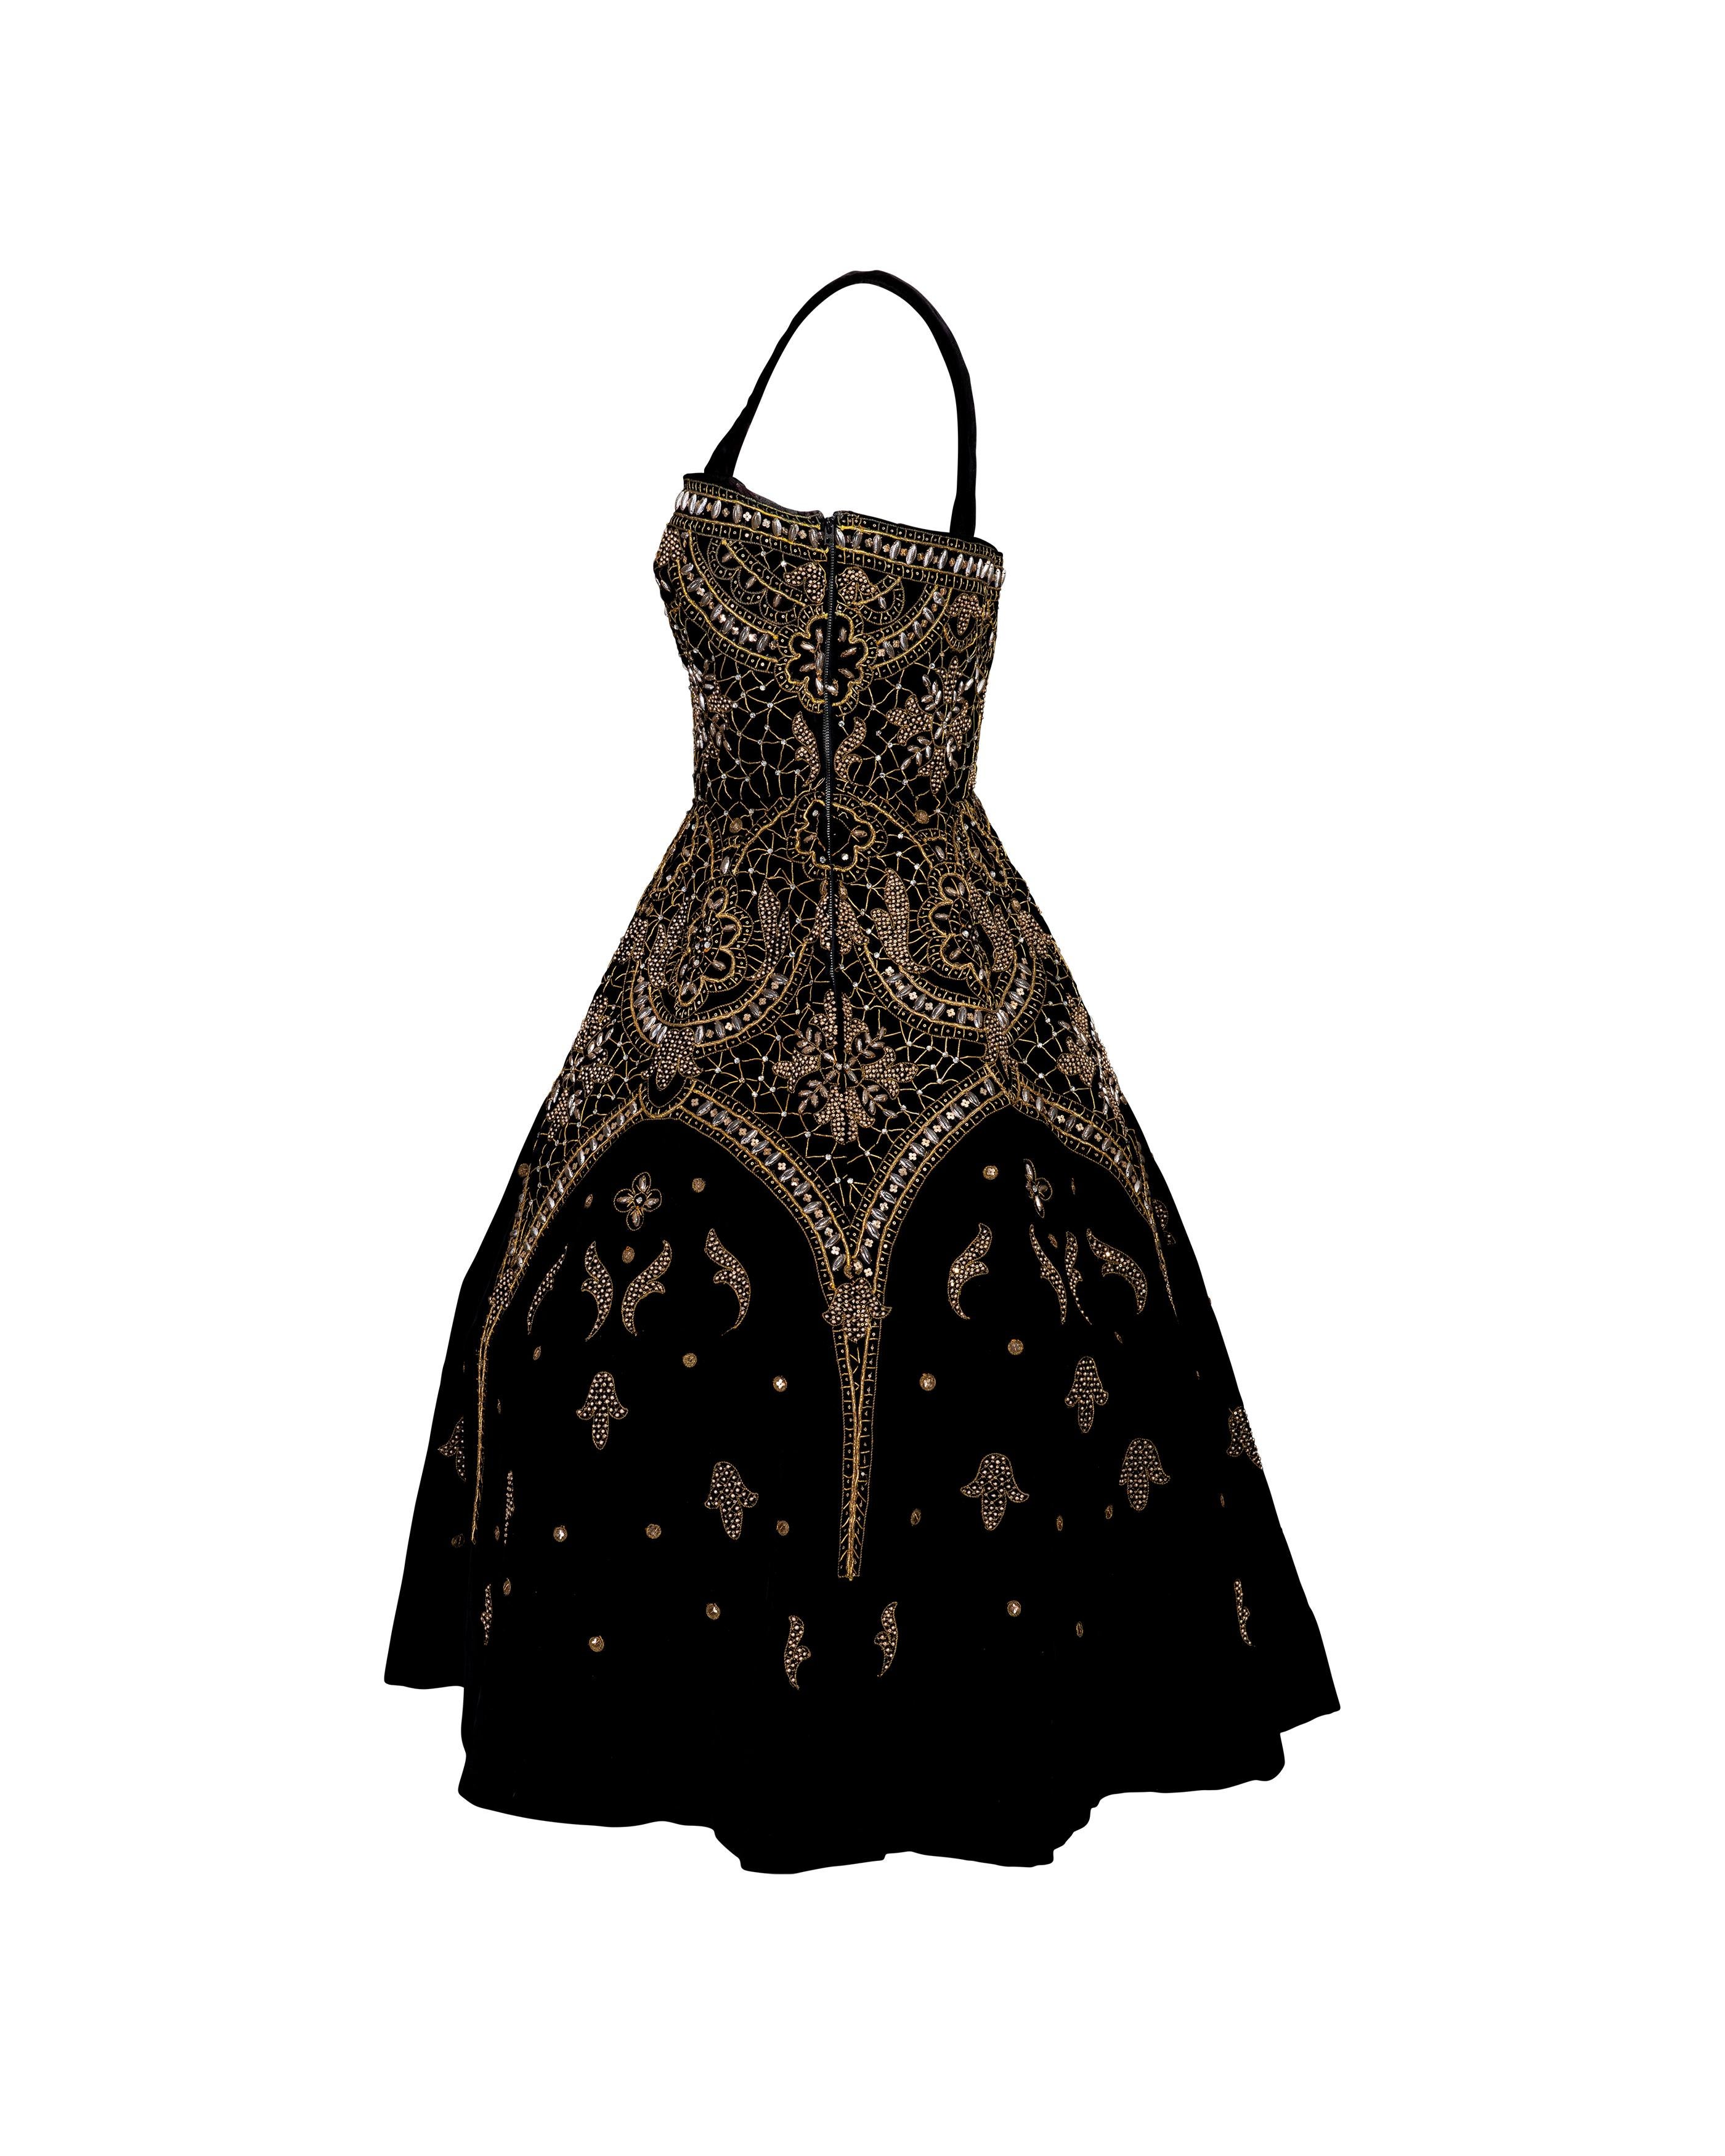 Women's A/W 1956 Jeanne Lanvin Haute Couture Black and Gold Embroidered Velvet Dress For Sale